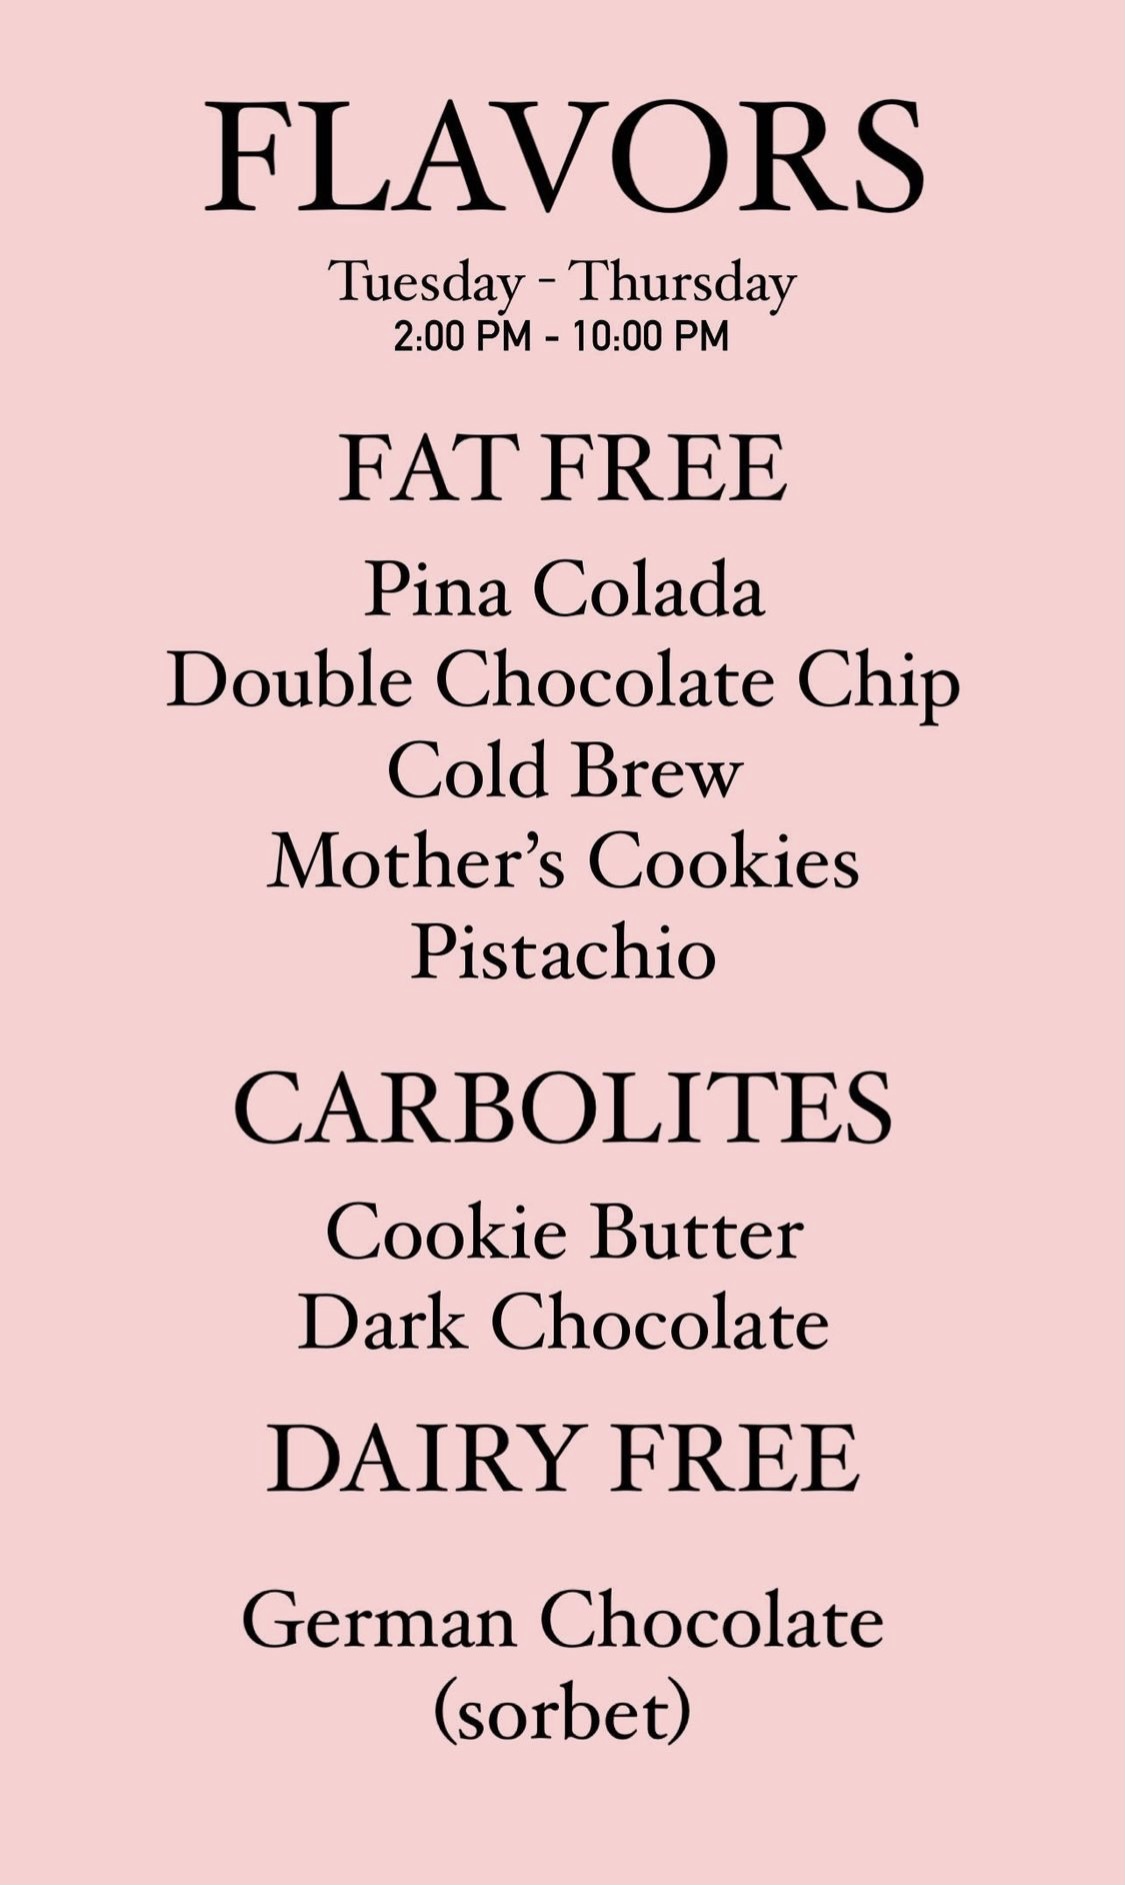 Frozen Yogurt Shop Appears To Troll Demi Lovato By Updating Menu With New Fat Free & Low Carb Flavors